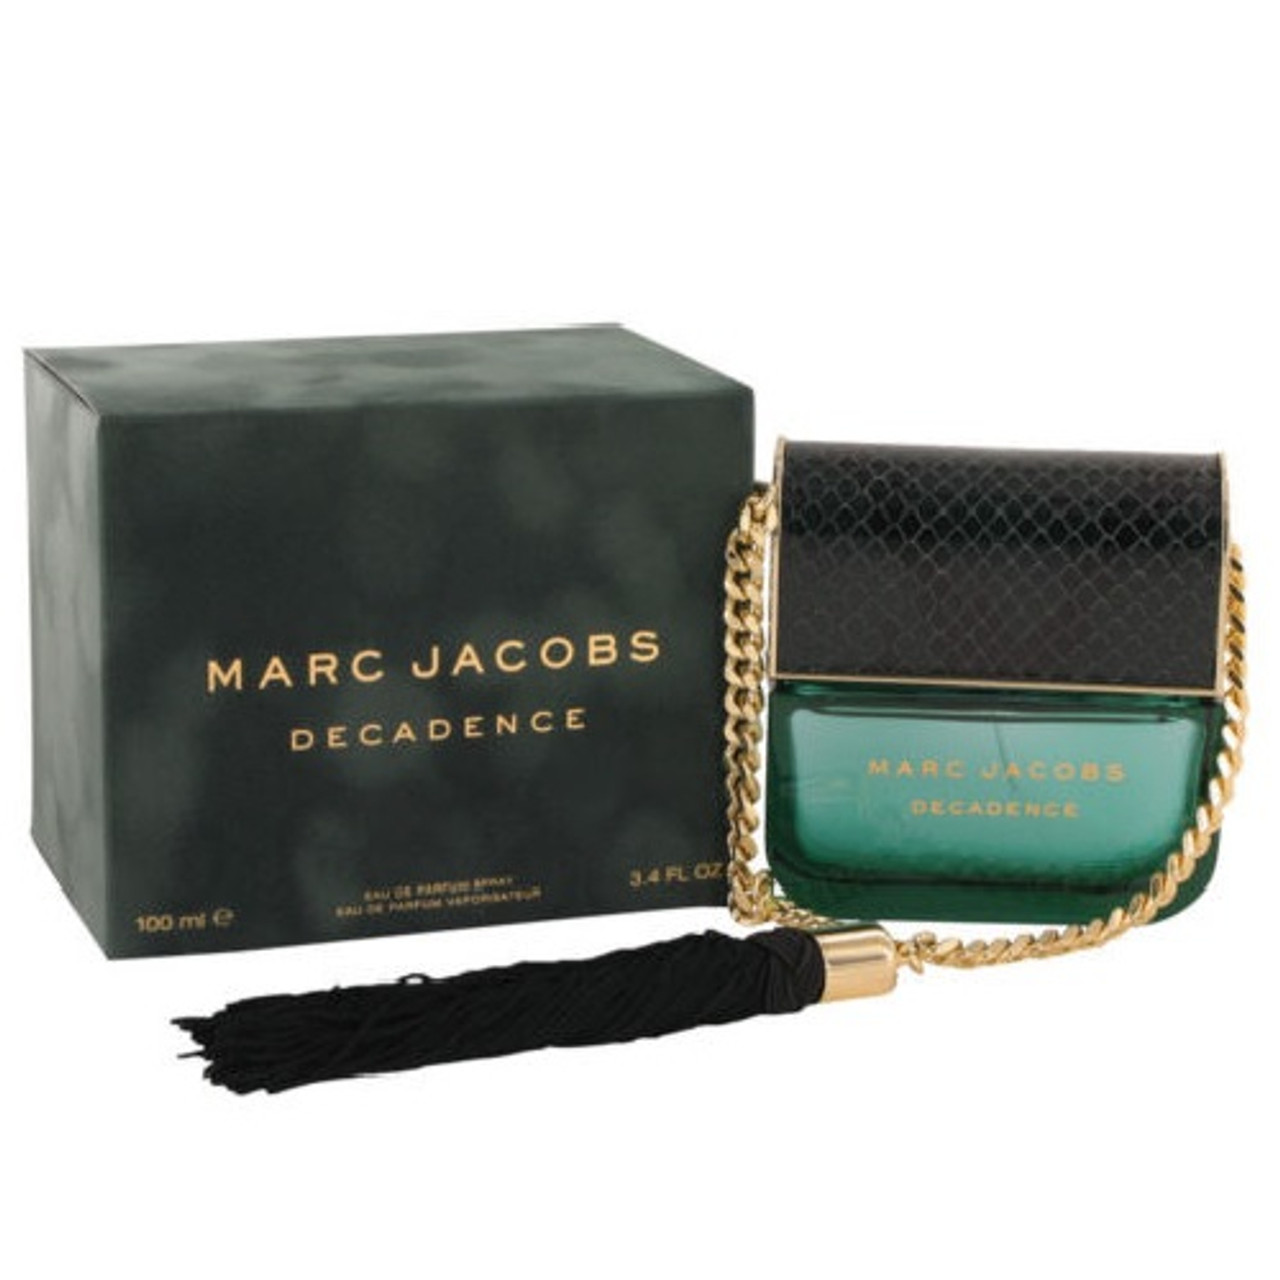 Begraafplaats diefstal procent Marc Jacobs Decadence by Marc Jacobs 3.4 oz EDP for women - ForeverLux